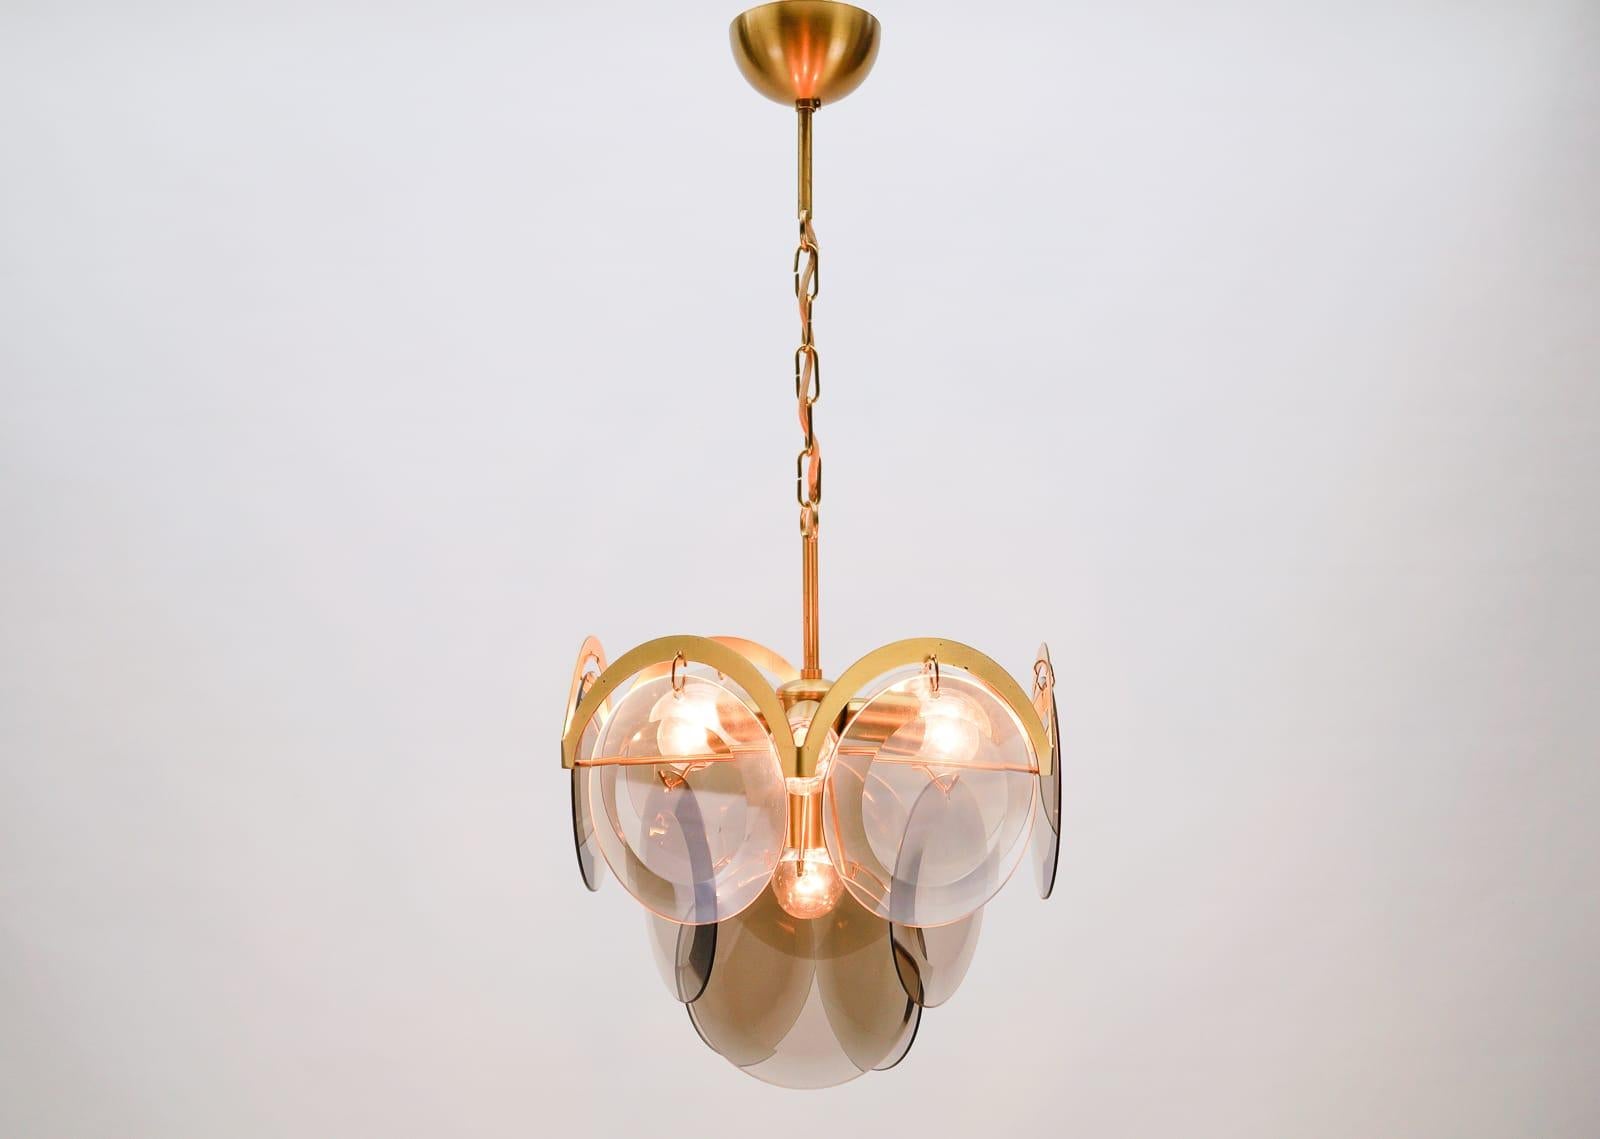 Mid-20th Century Very Elegant & Delicate Hanging Lamp with Smoked Glass Panes, 1960s Italy For Sale